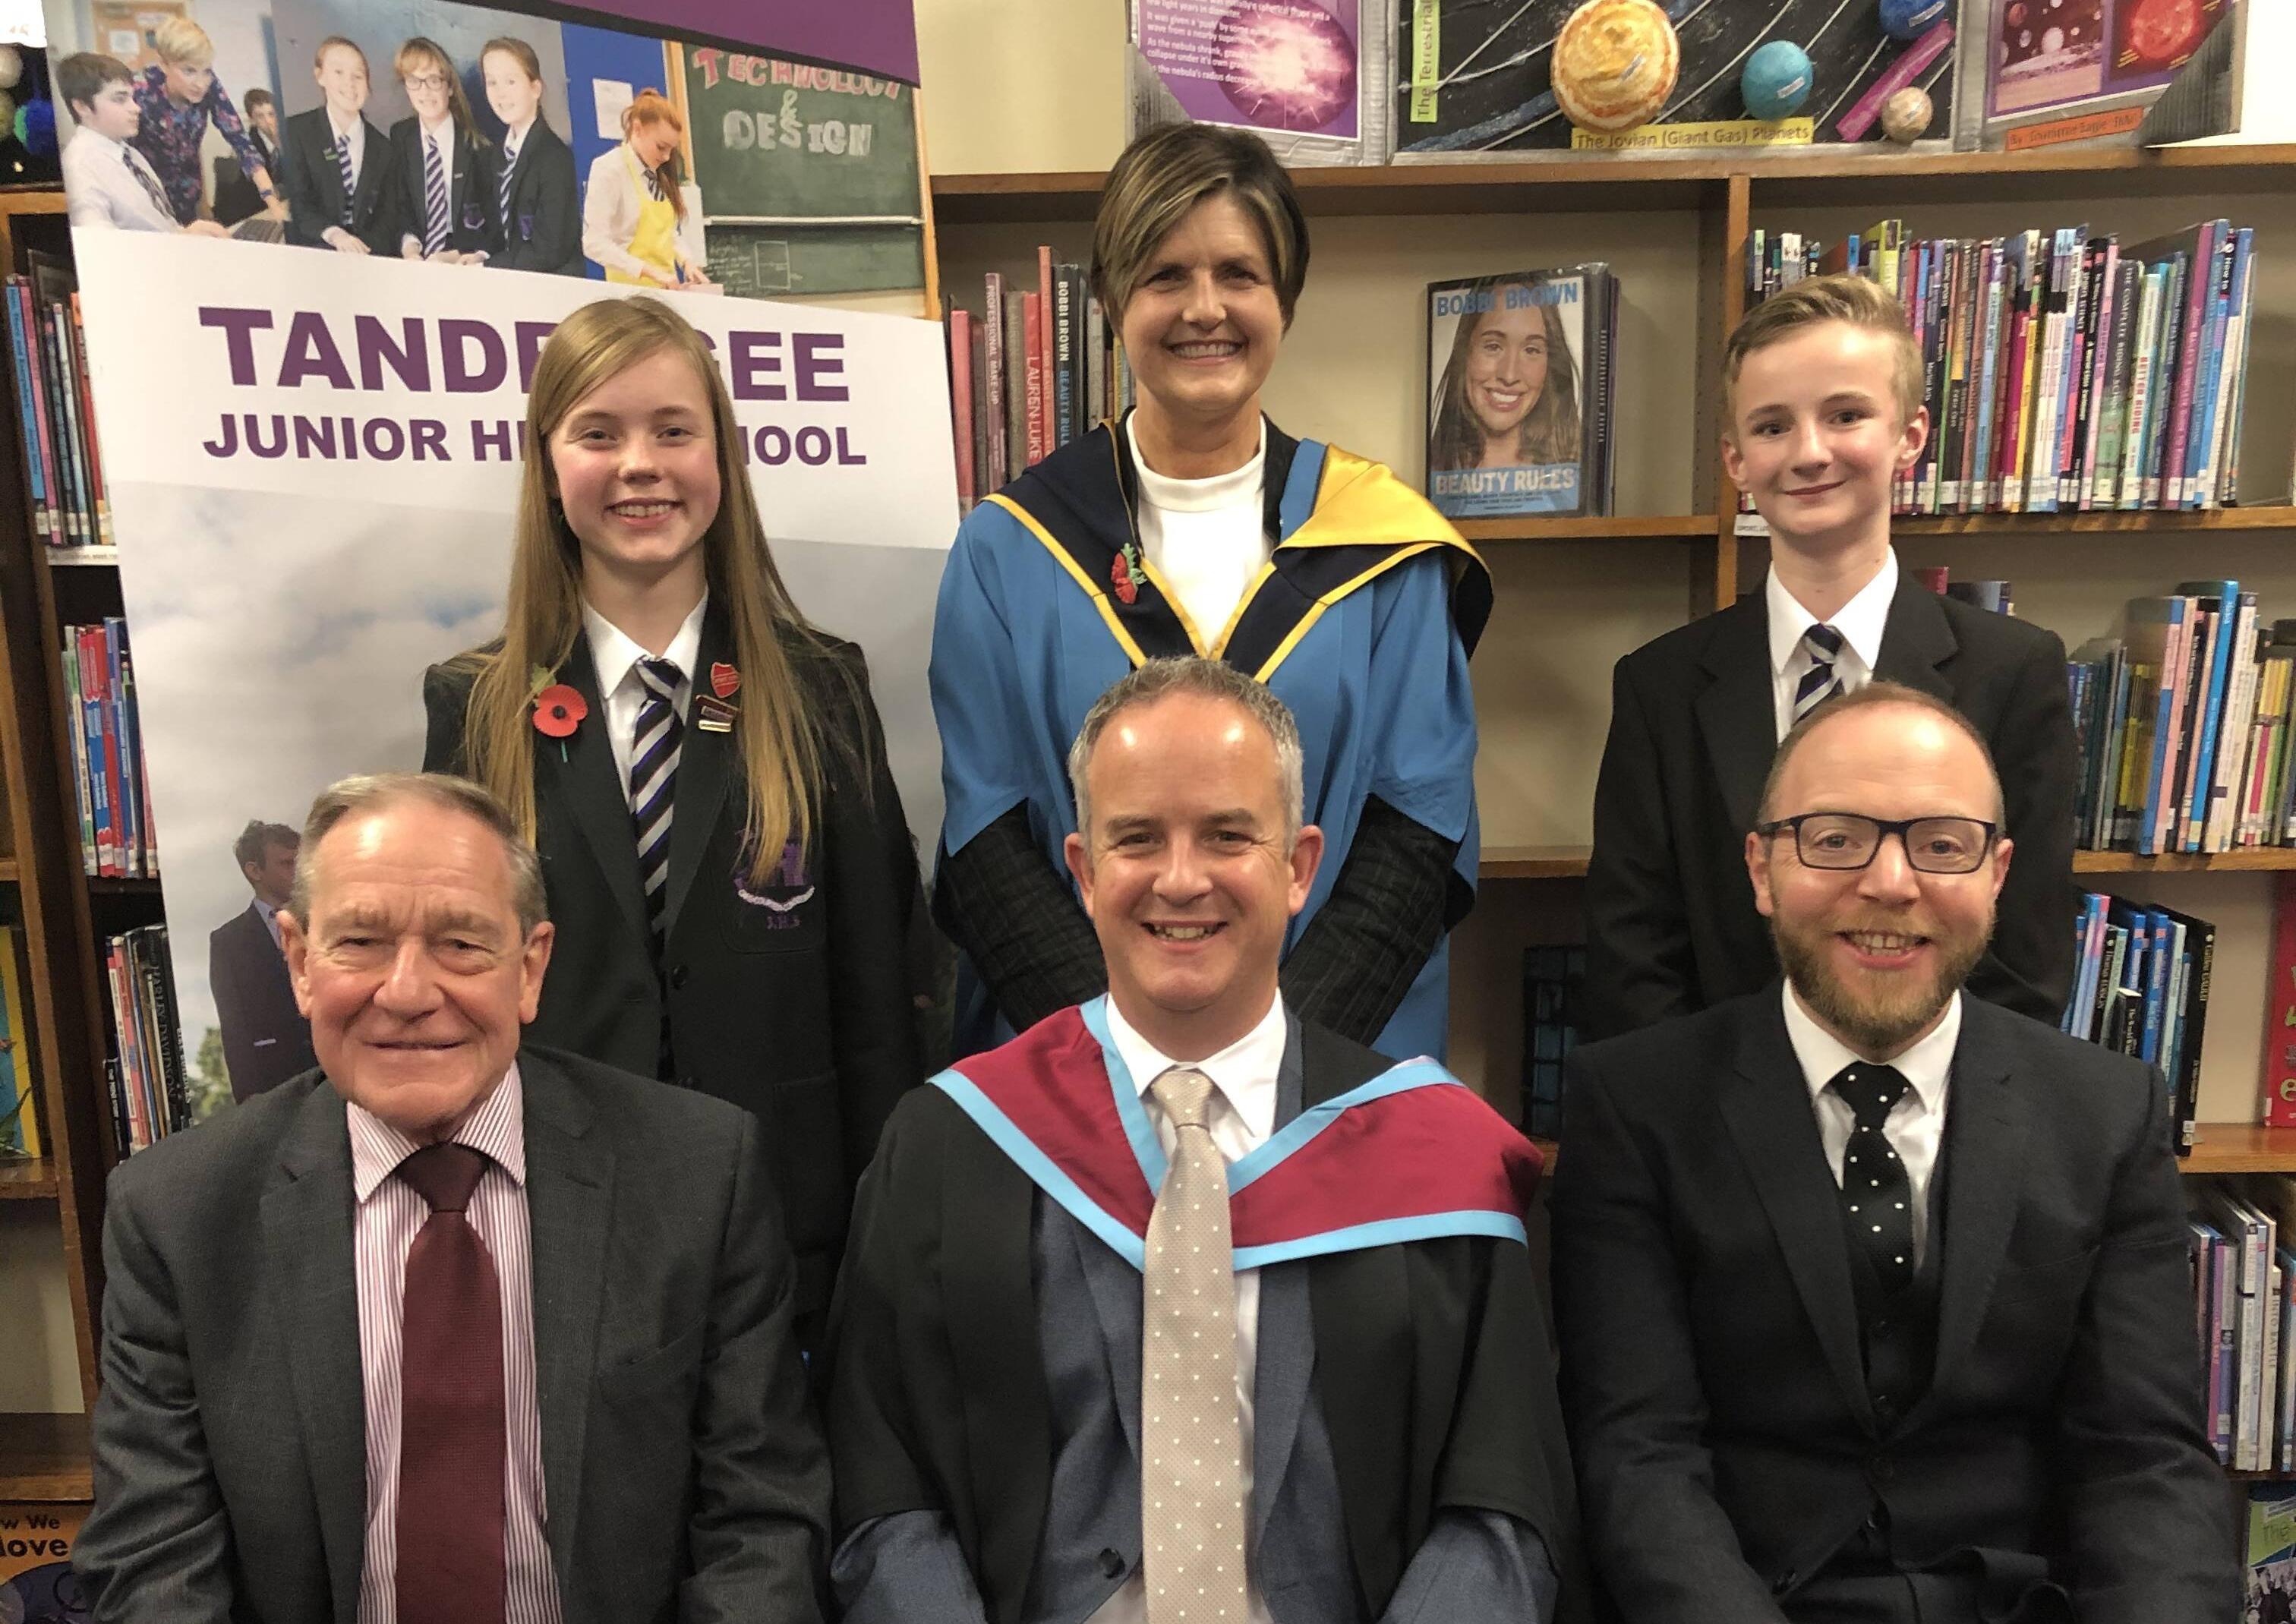 At the Tandragee Junior High School prize night are Head Girl (Rachel Spence) and Head Boy (Nathan Rafferty) pictured with Mrs DL Inns (Vice Principal), Mr R Leckey (Chairman of the Board of Governors), Mr W Brown (Principal) and Mr Mark Moorhead (Guest Speaker)